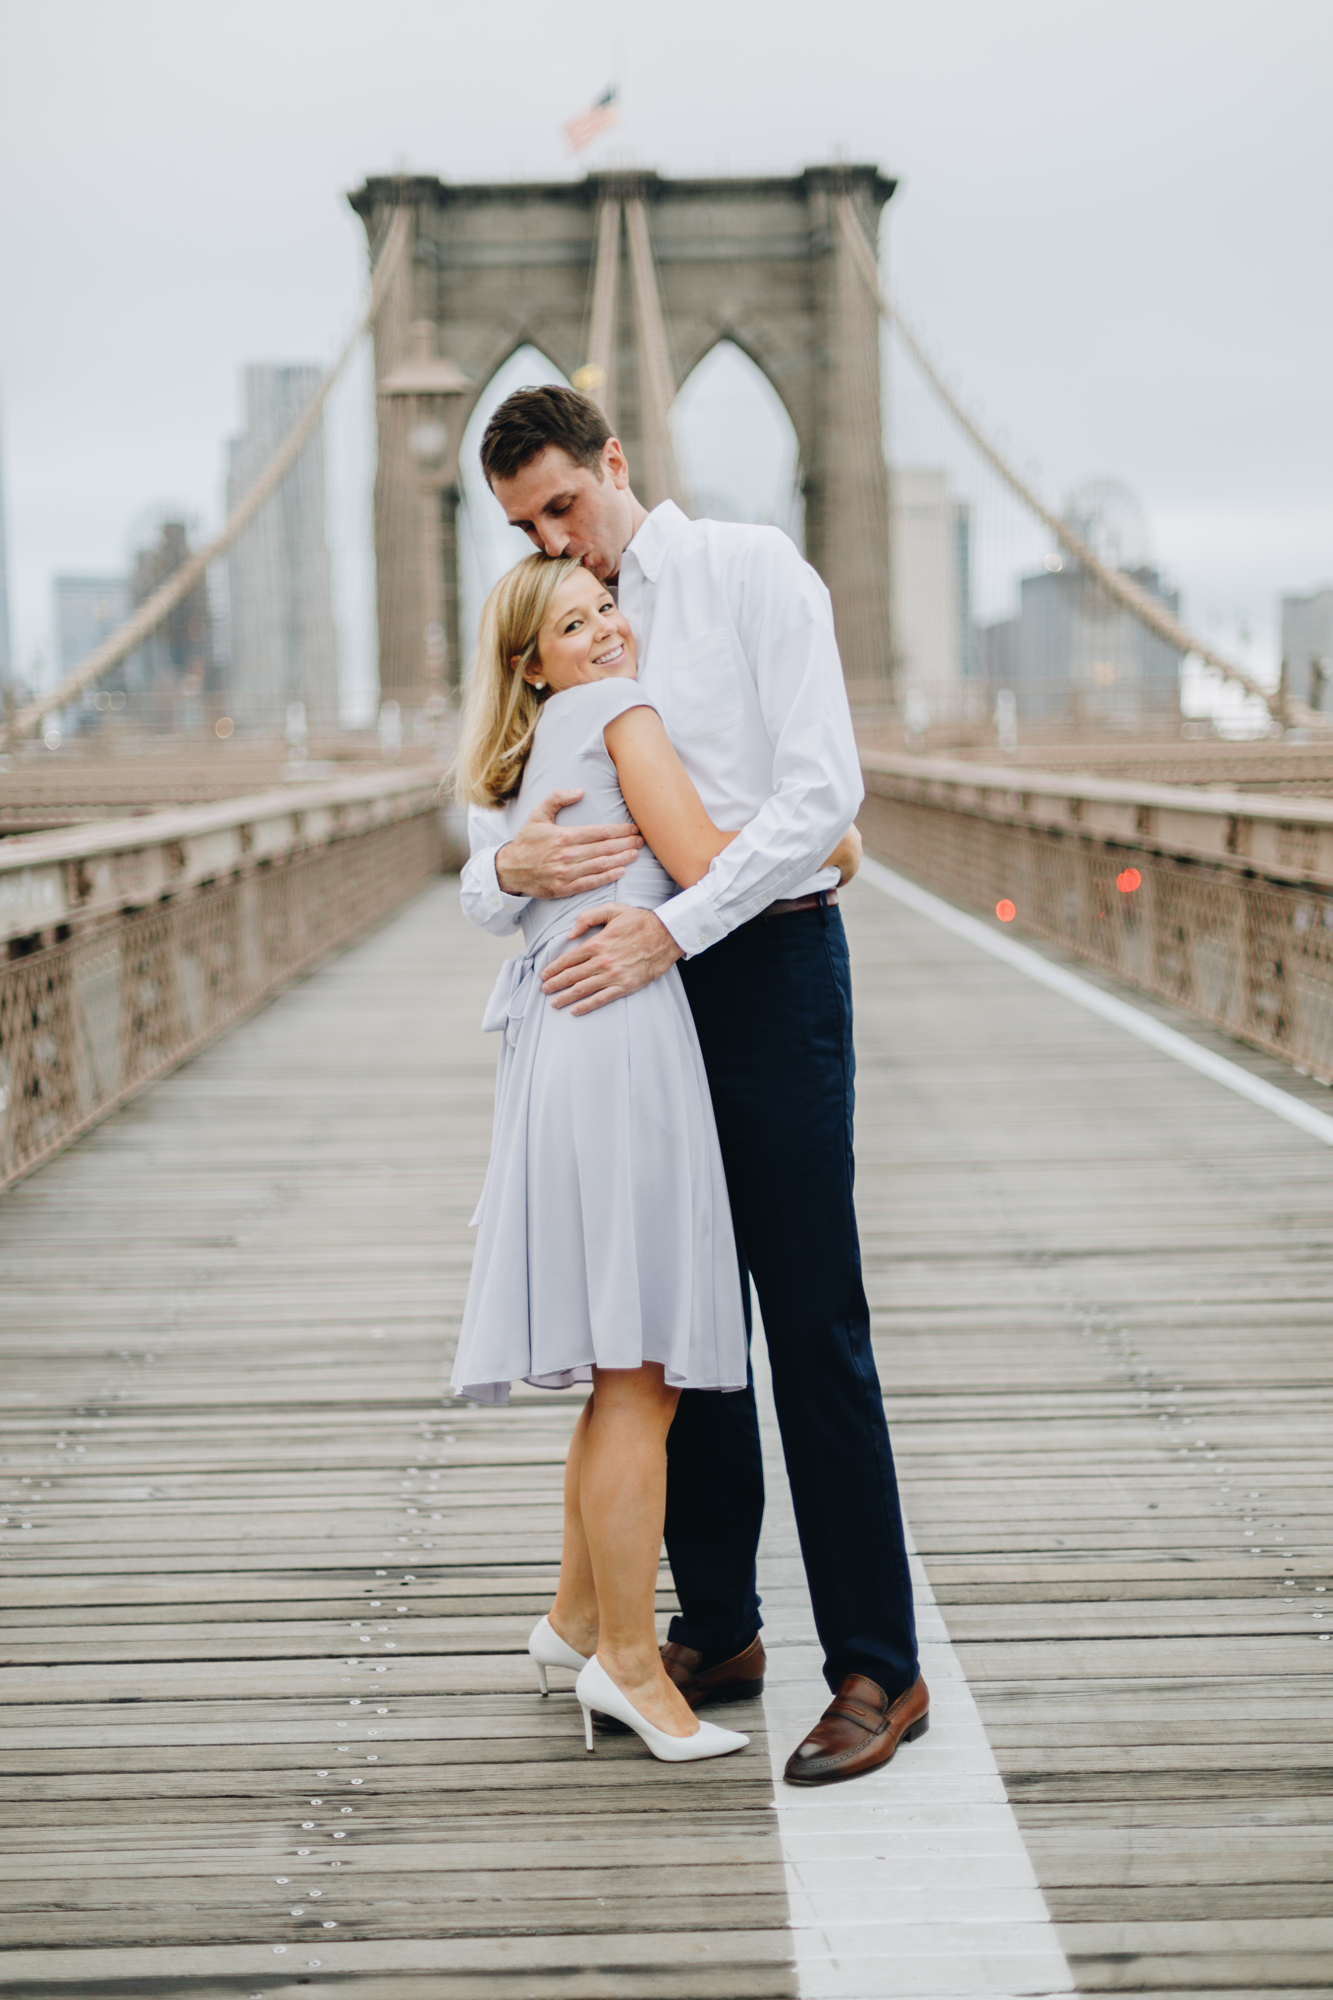 Magical Brooklyn Bridge Park Engagement Photos on a Cloudy Day in New York